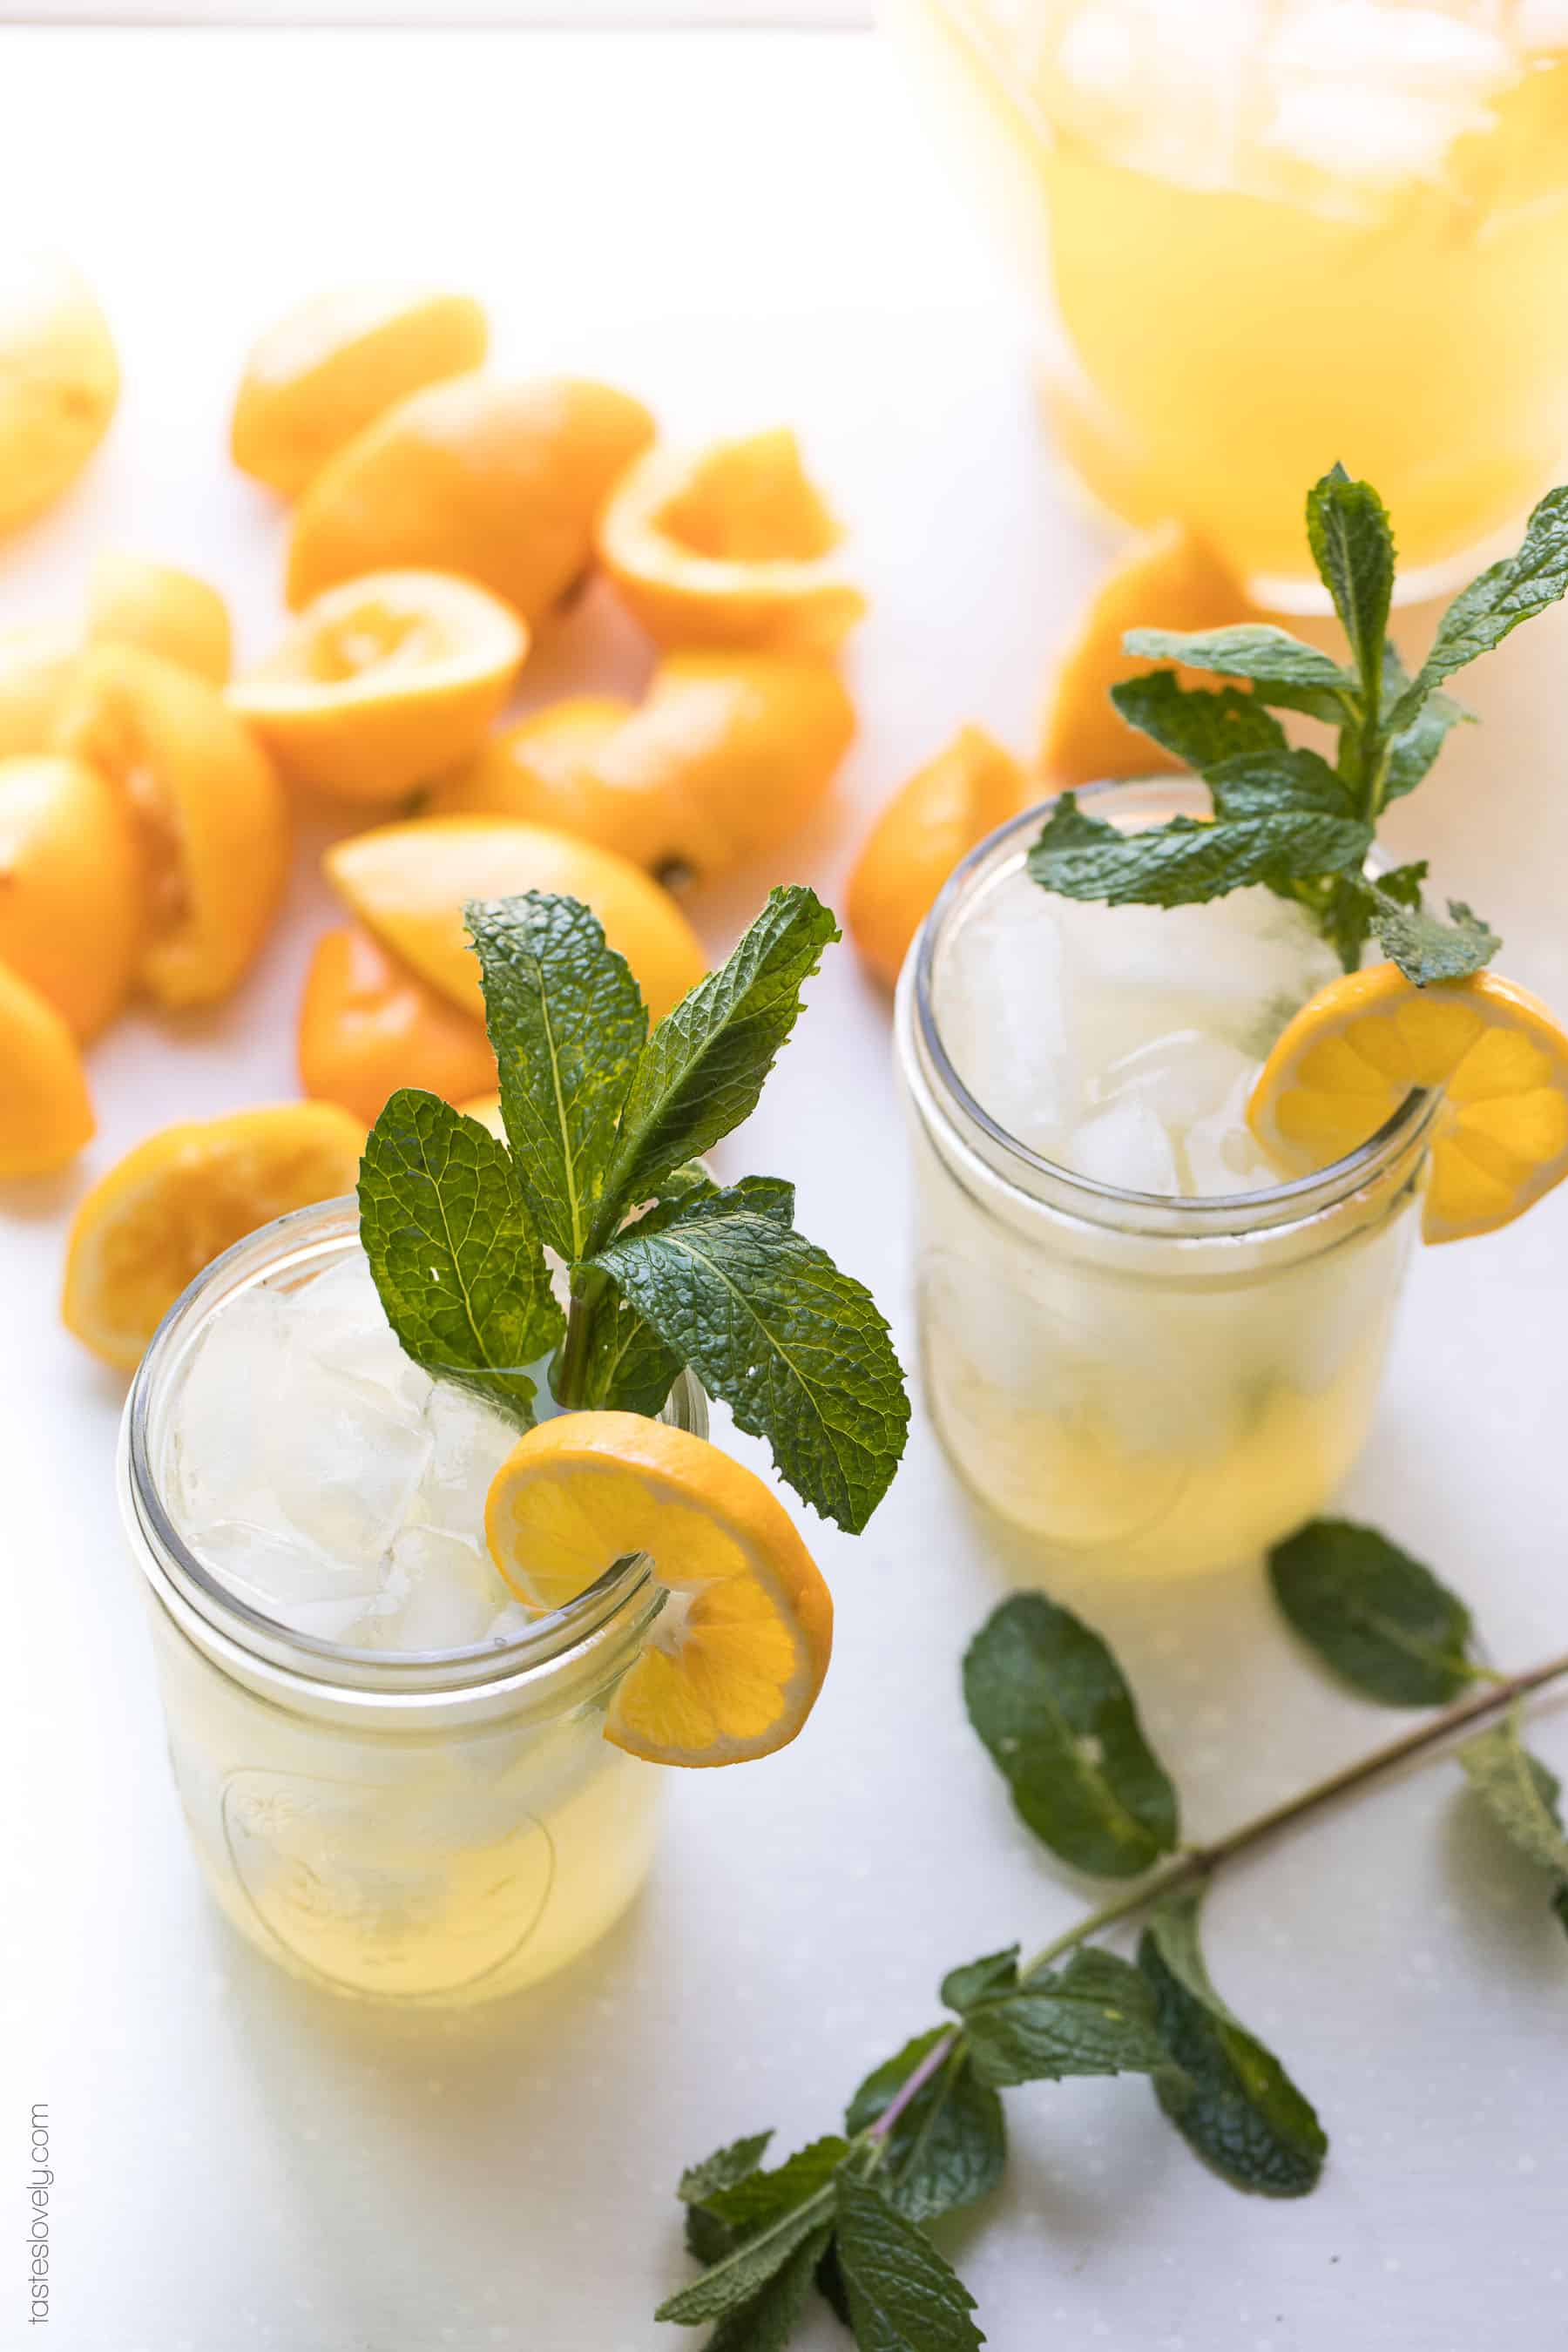 Healthier Paleo Lemonade - no refined sugar, sweetened with maple syrup!